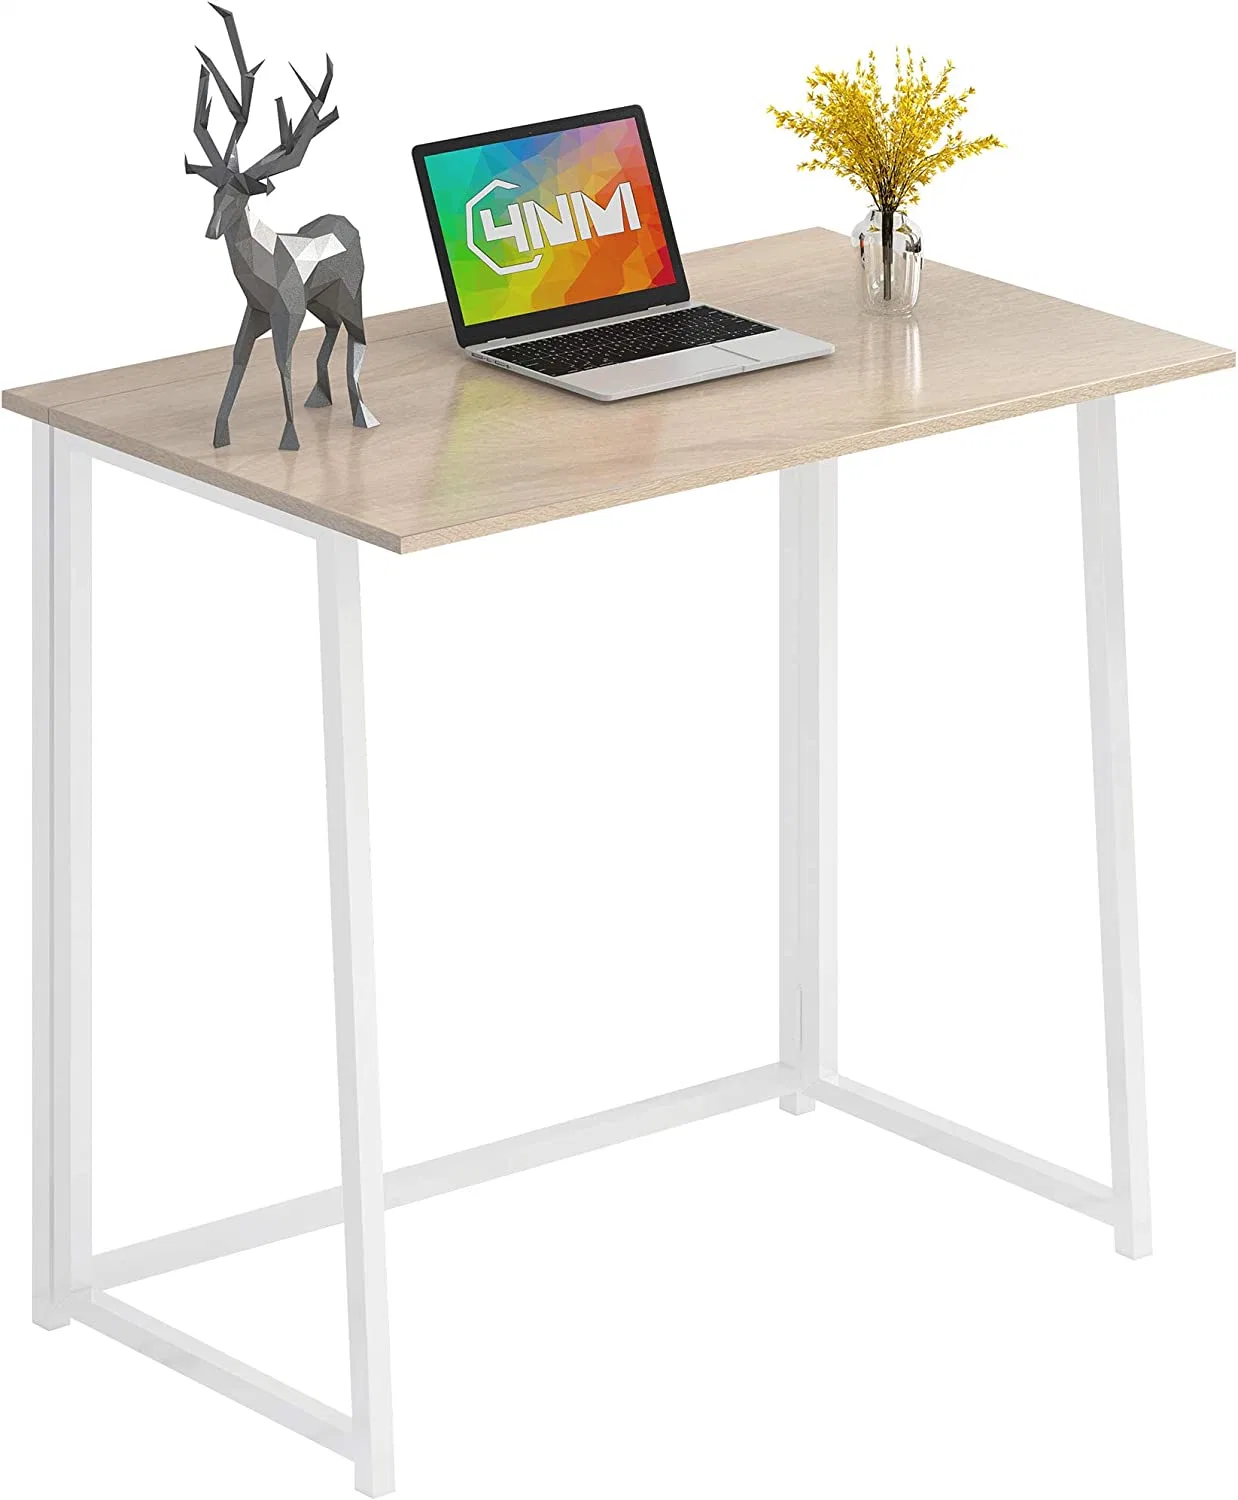 Folding Table TV Snack Tray Table